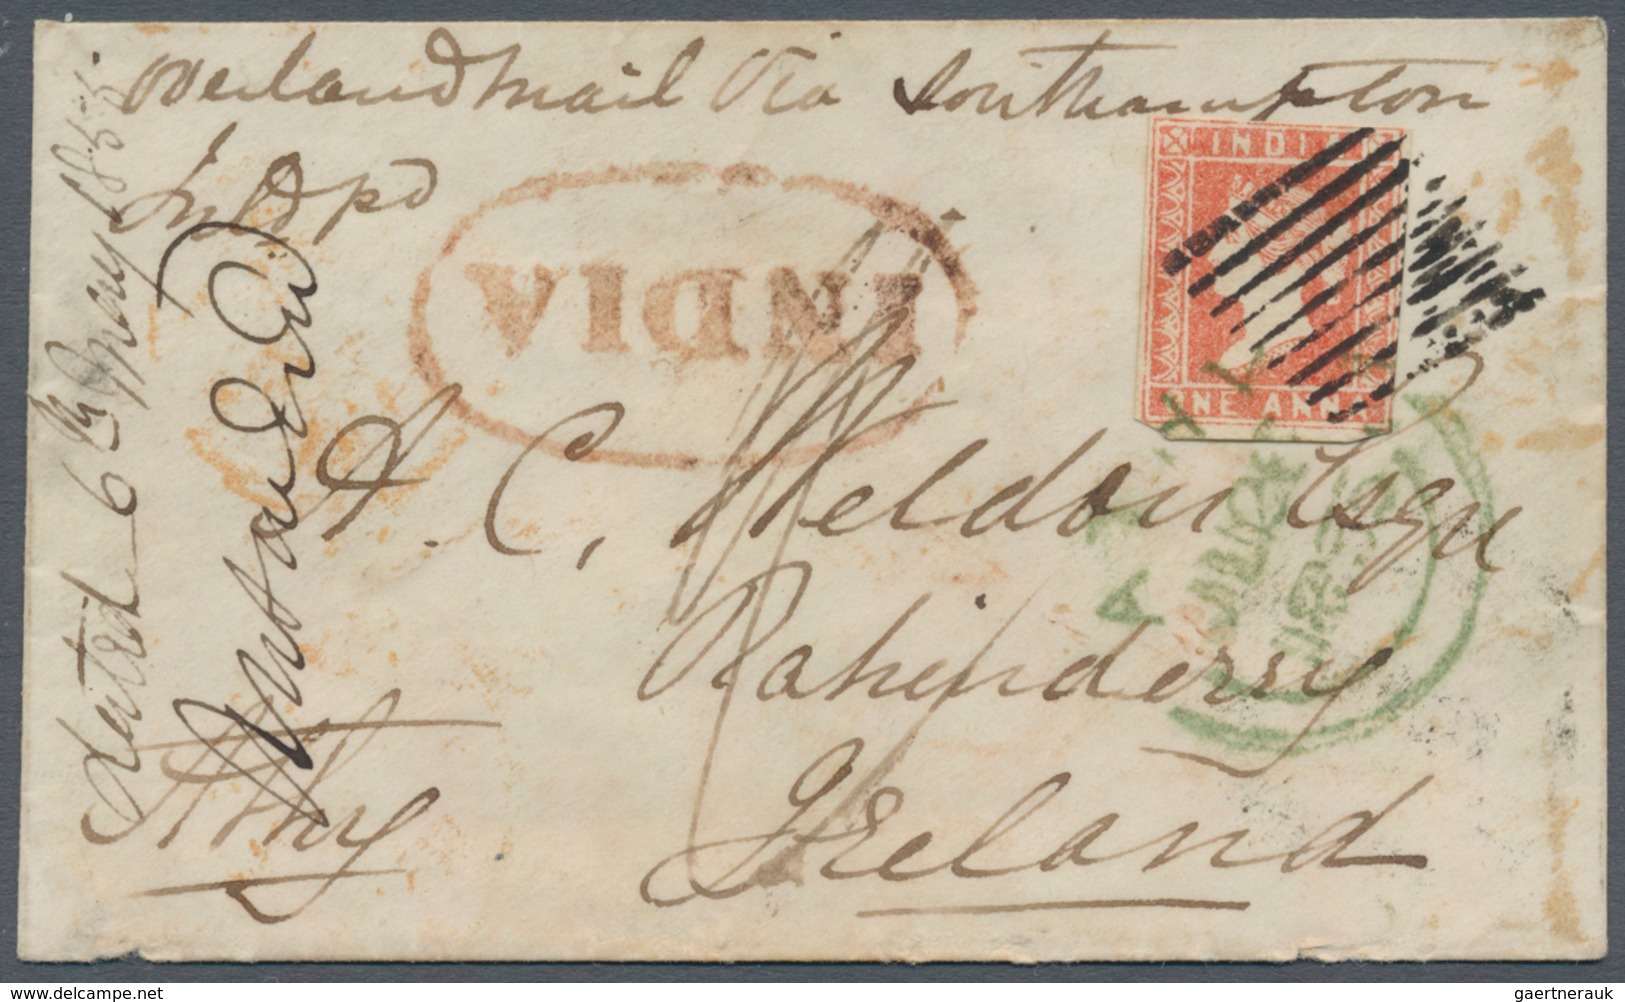 Indien: 1855 Lithographed 1a. Dull Red, Die II, Used On Small Cover From Jaulnah To Rahinderry Near - 1852 Sind Province